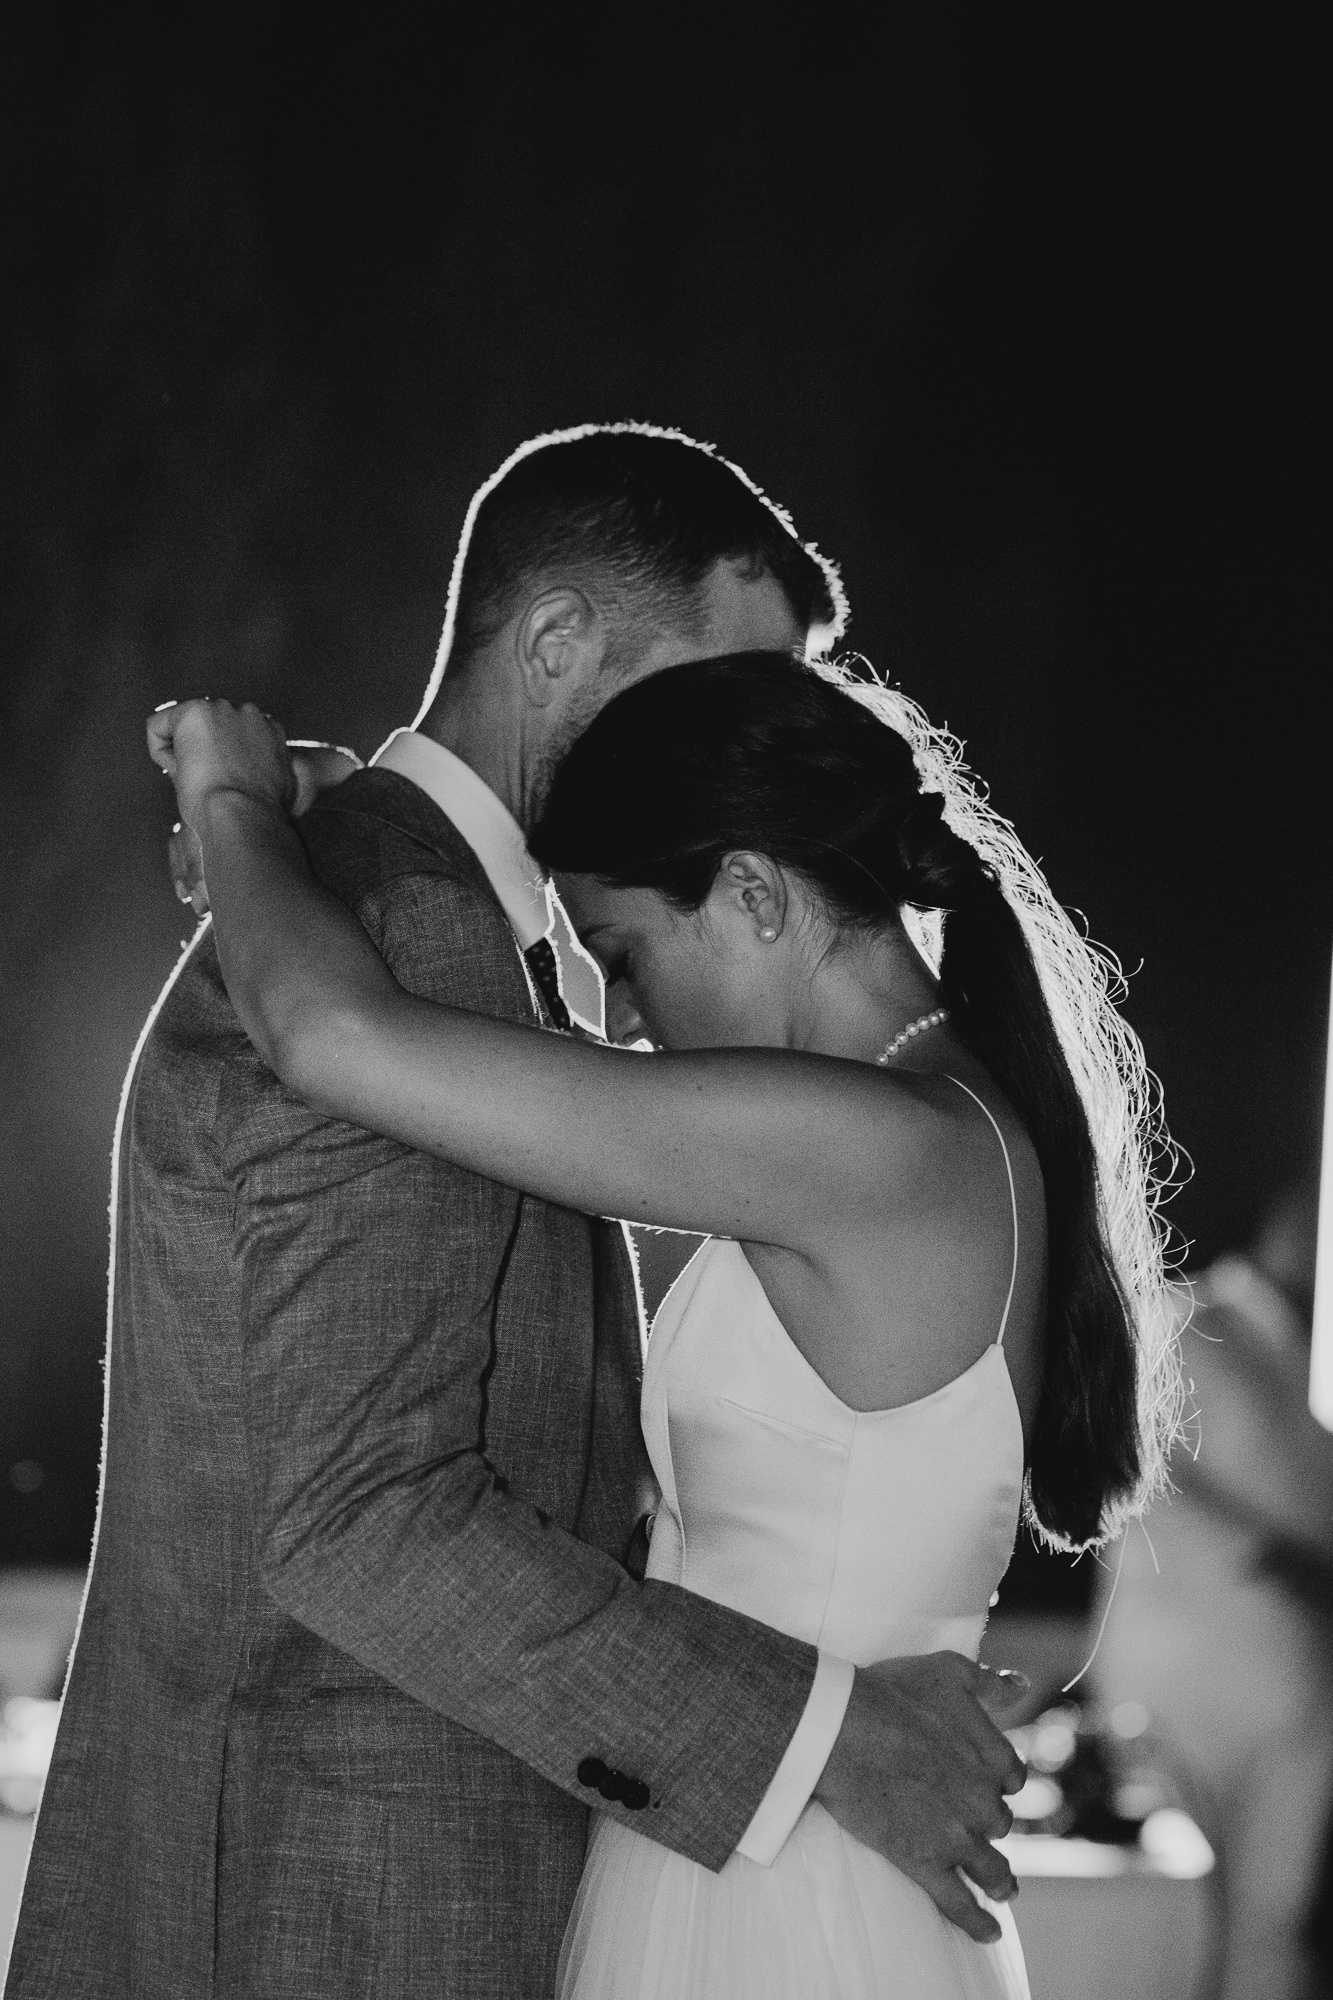 a bride and groom dance together during their wedding reception at casa de los bates in nerja, spain